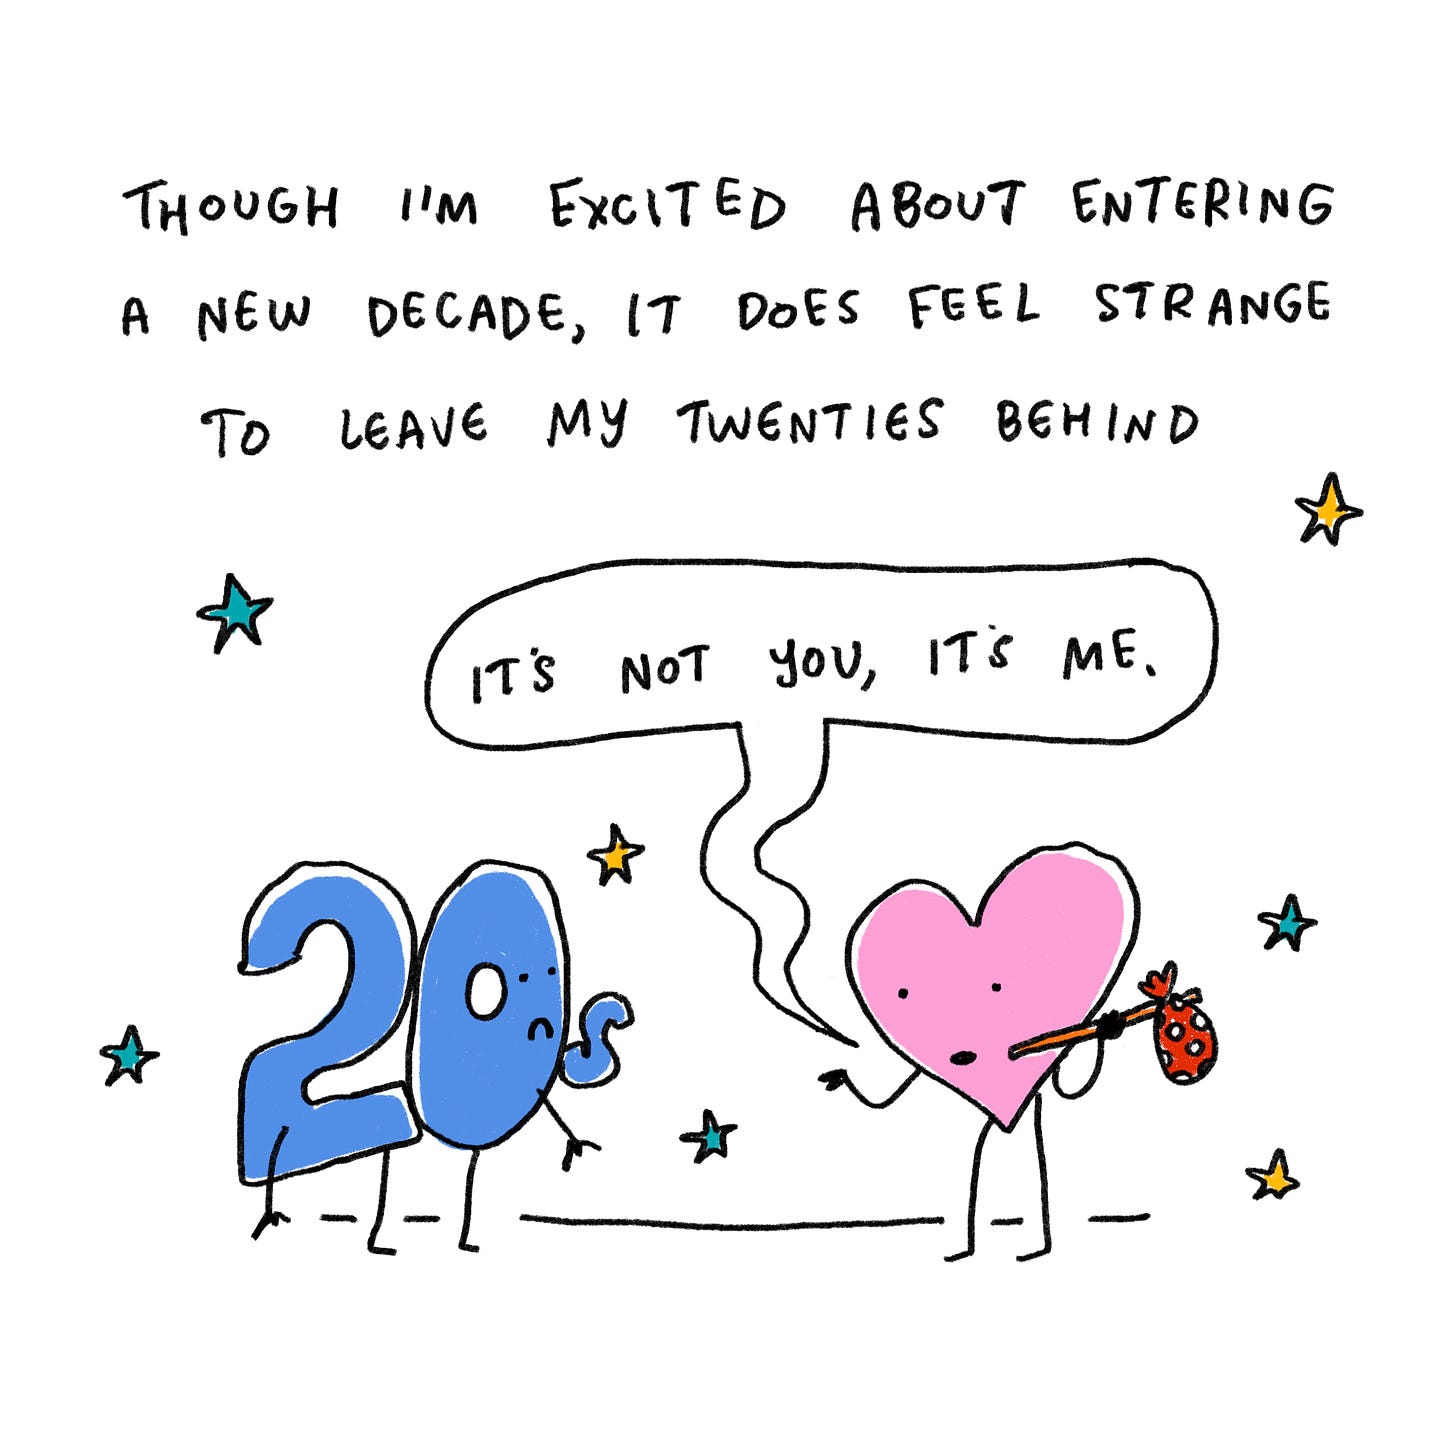 Though I’m excited about entering a new decade, it does feel strange to leave behind my twenties.